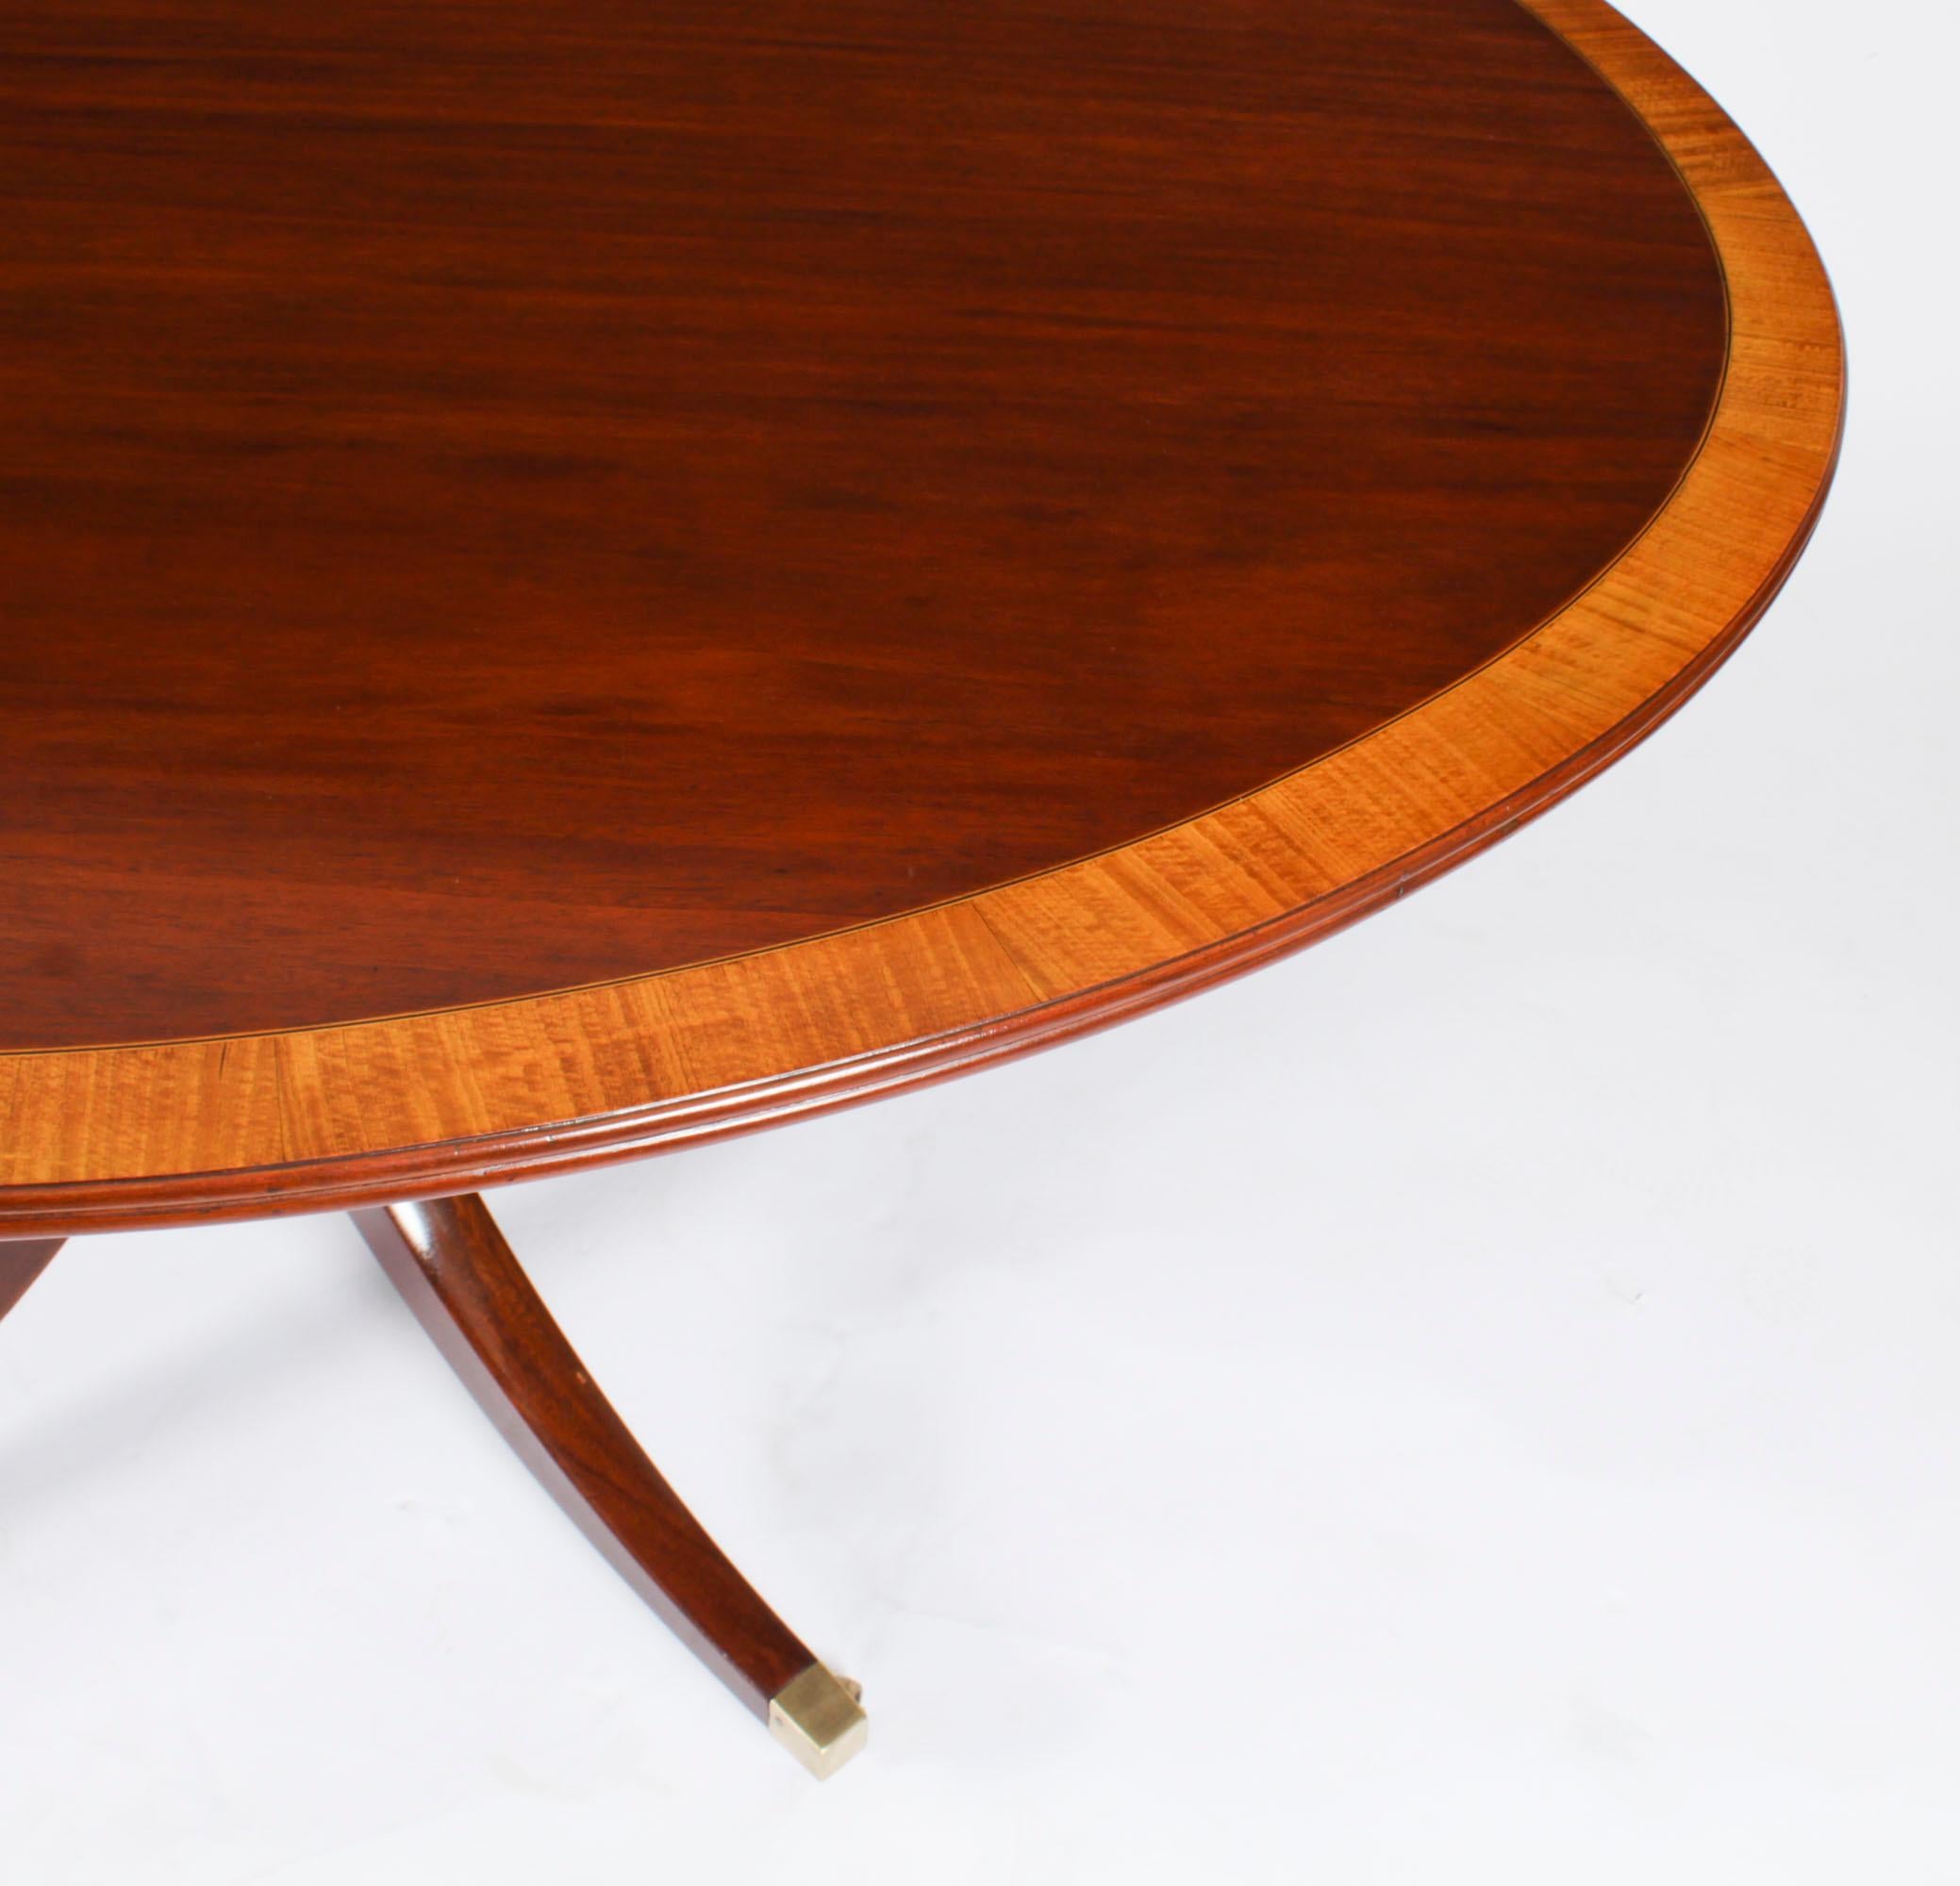 Antique Oval Mahogany Tilt Top Dining Table, Early 20th Century For Sale 5